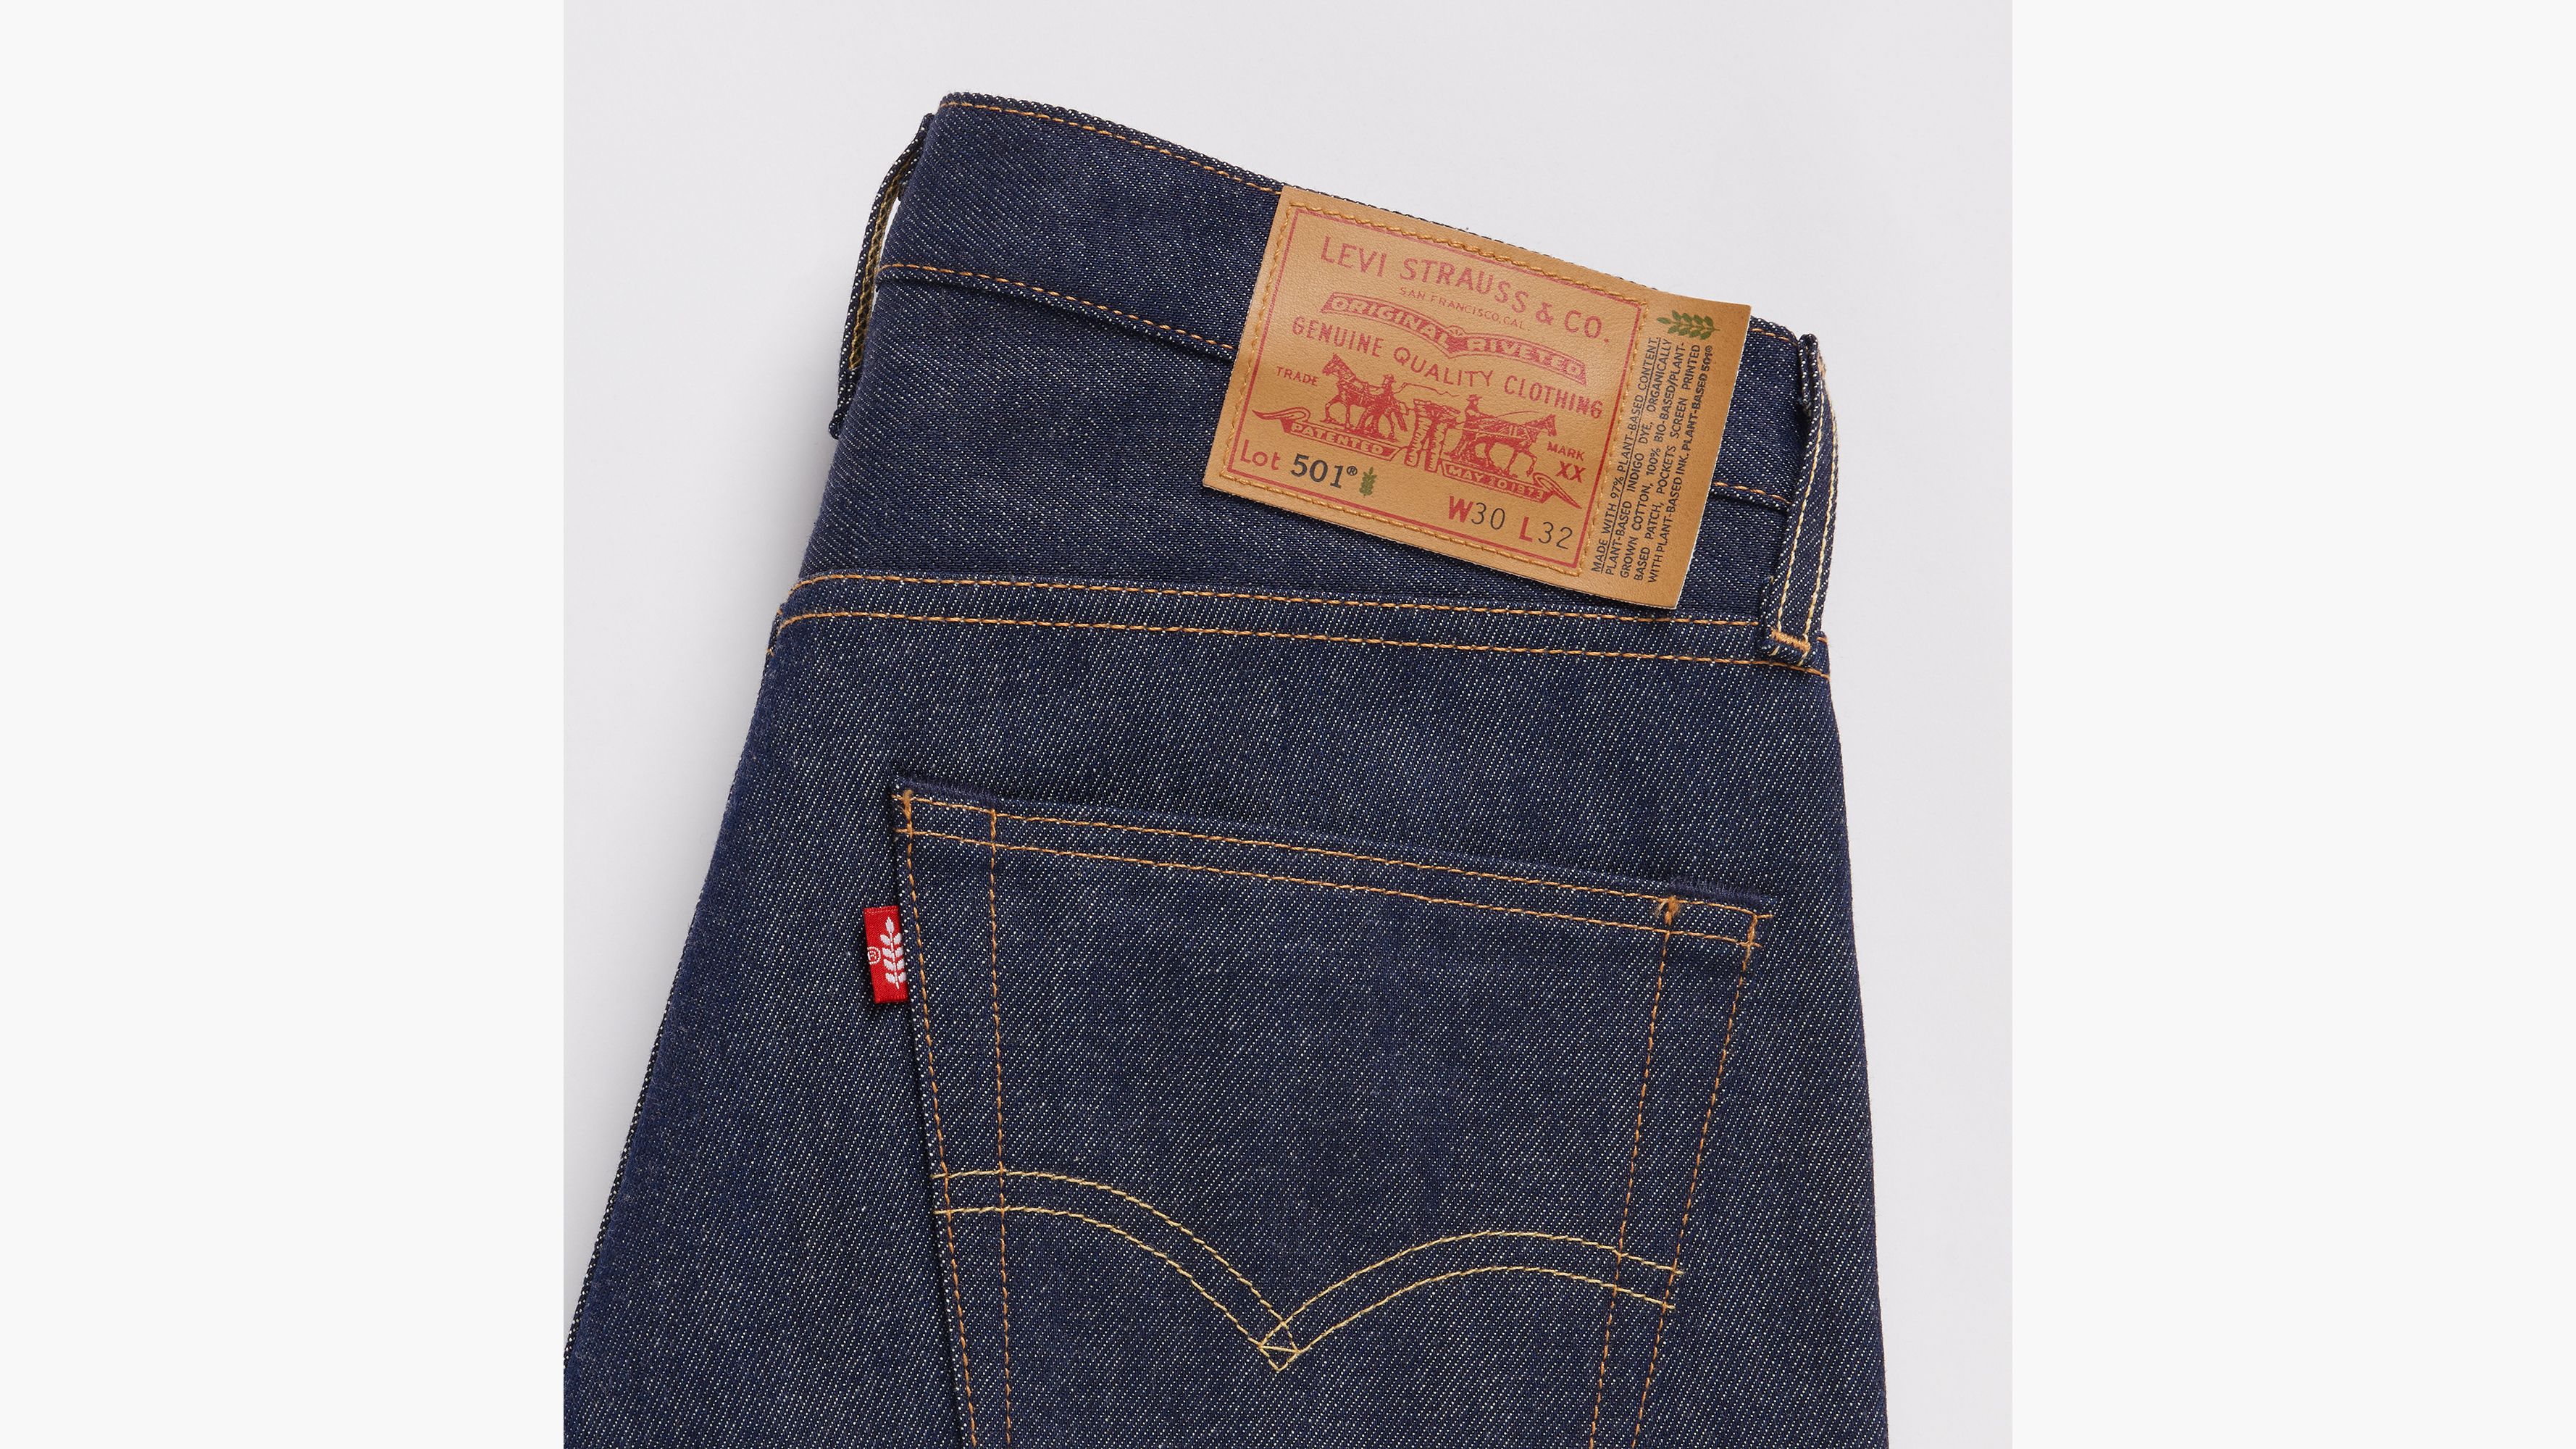 Levi's Plant-Based 501 Jeans Are the Future of Fashion